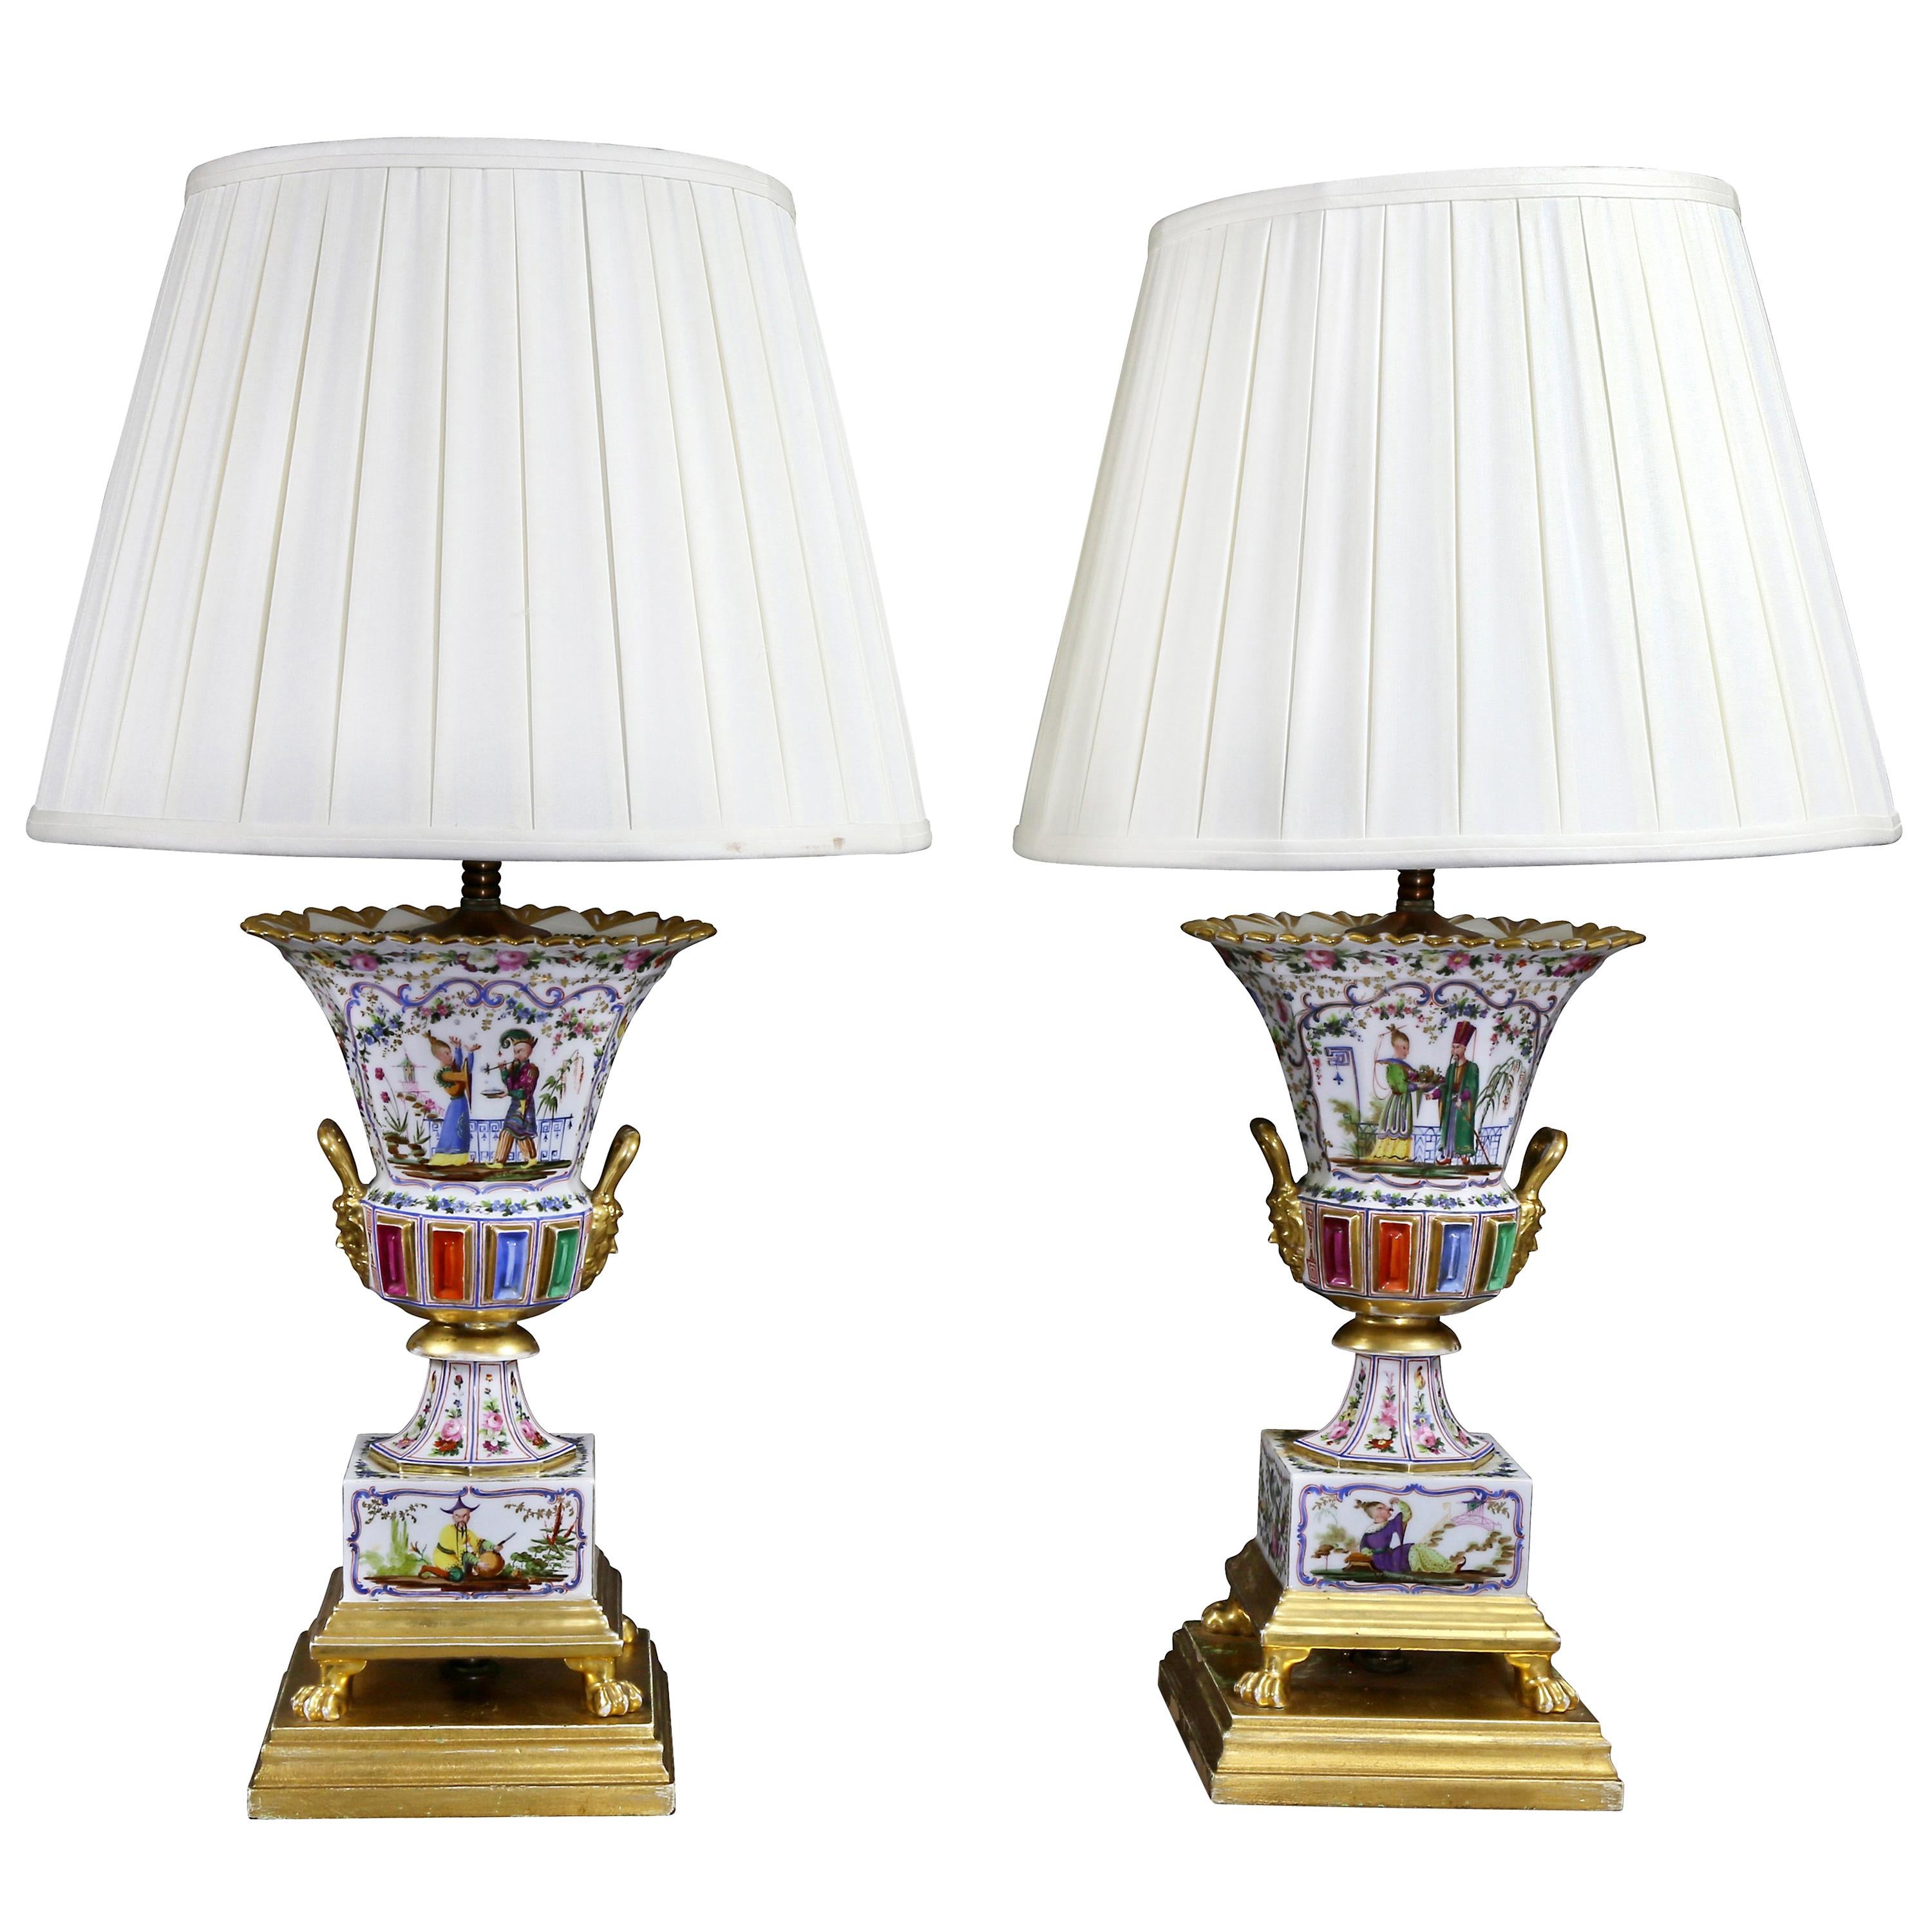 Pair of Jacob Petit Porcelain Vases Mounted as Lamps